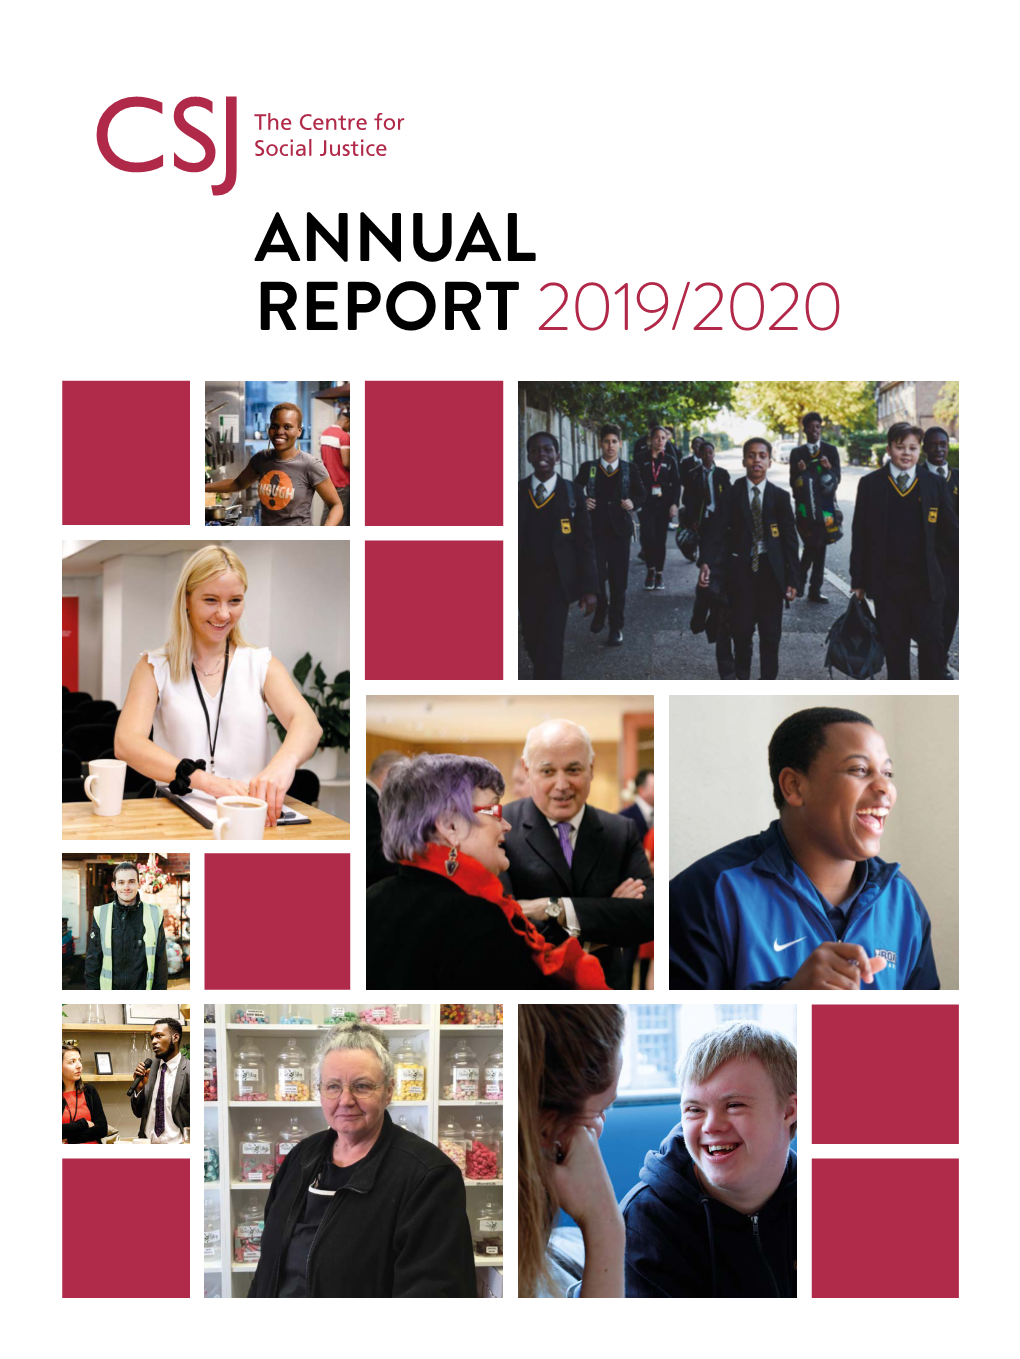 ANNUAL REPORT 2019/2020 Over the Past 12 Months the CSJ Has Produced 24 Reports and Made 109 Recommendations